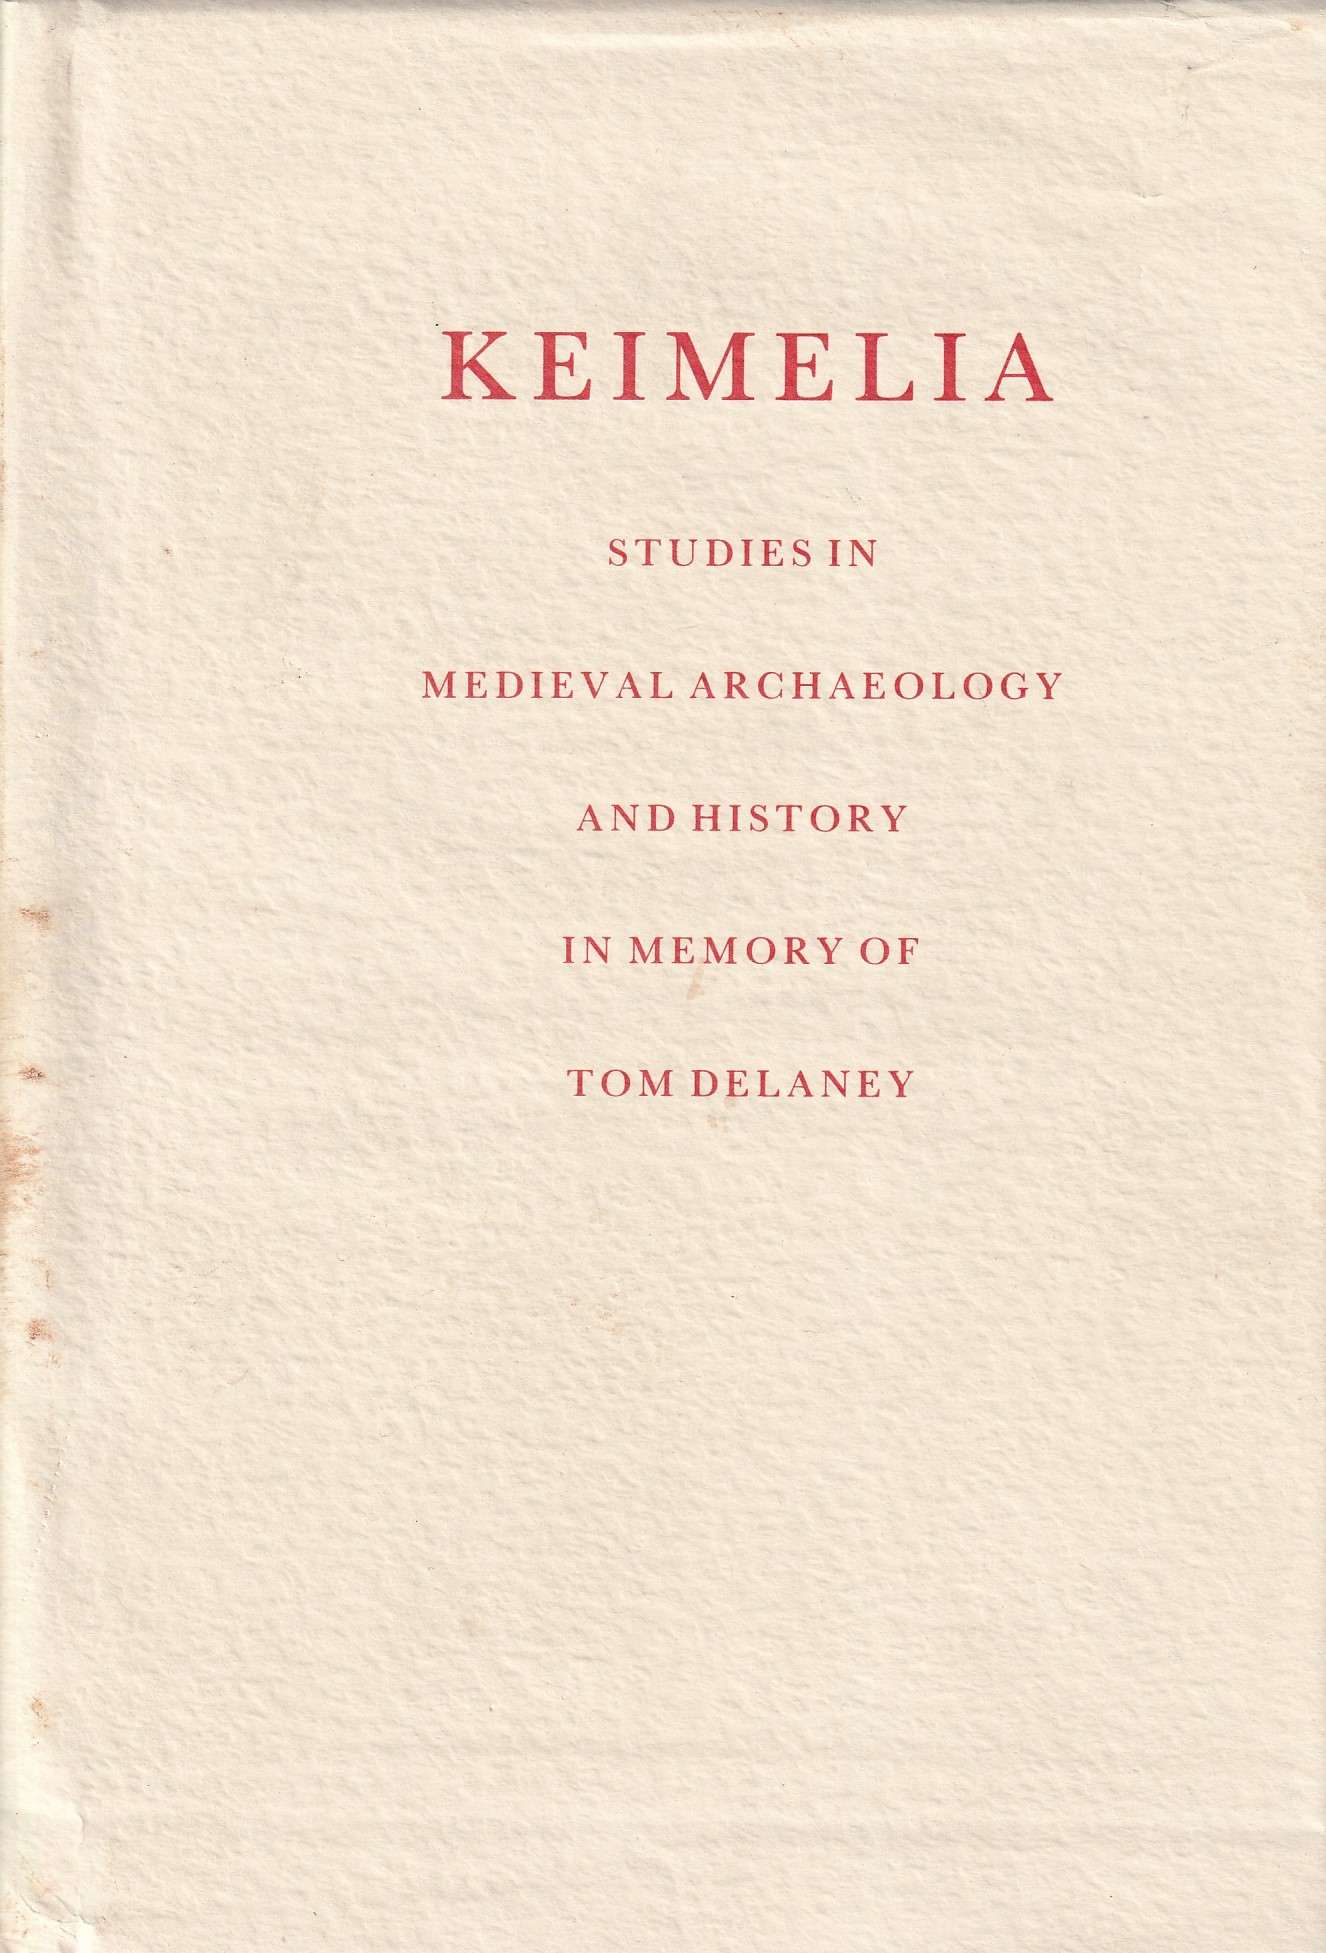 Keimelia: Studies in Medieval Archaeology and History in Memory of Tom Delaney | Gearóid Mac Niocaill & Patrick F. Wallace (eds.) | Charlie Byrne's